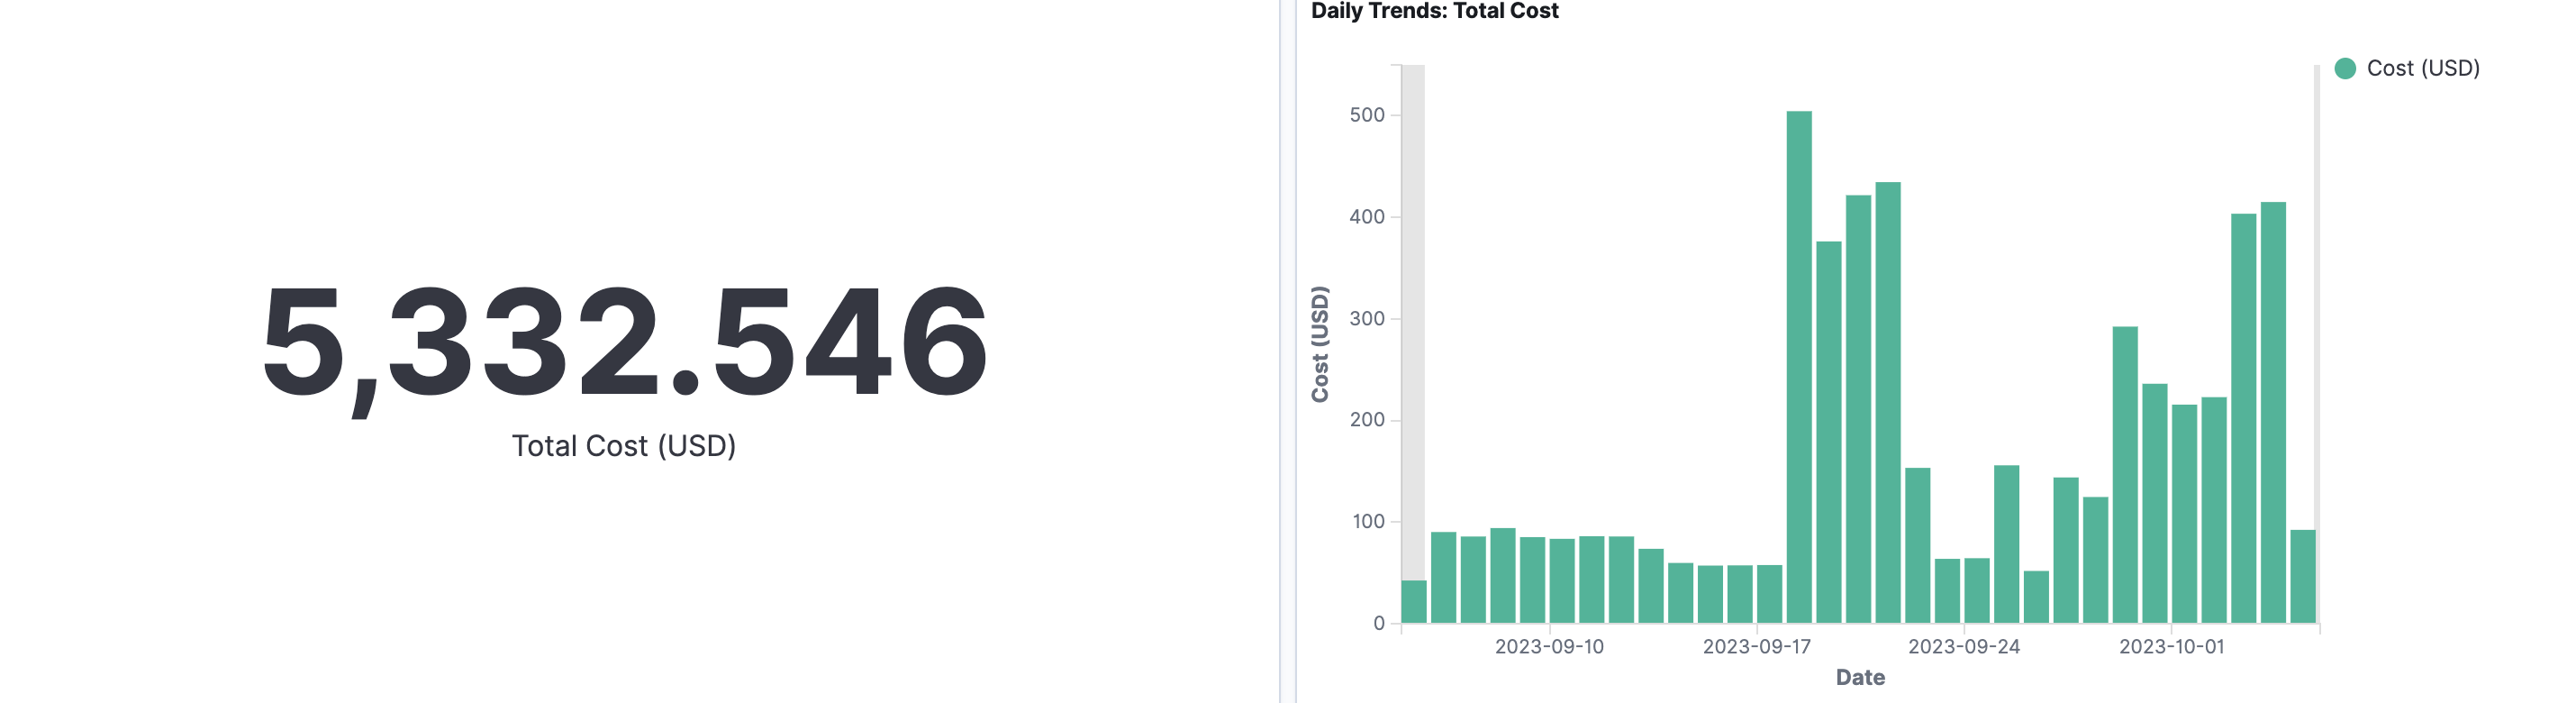 bigquery-total-cost-trend.png